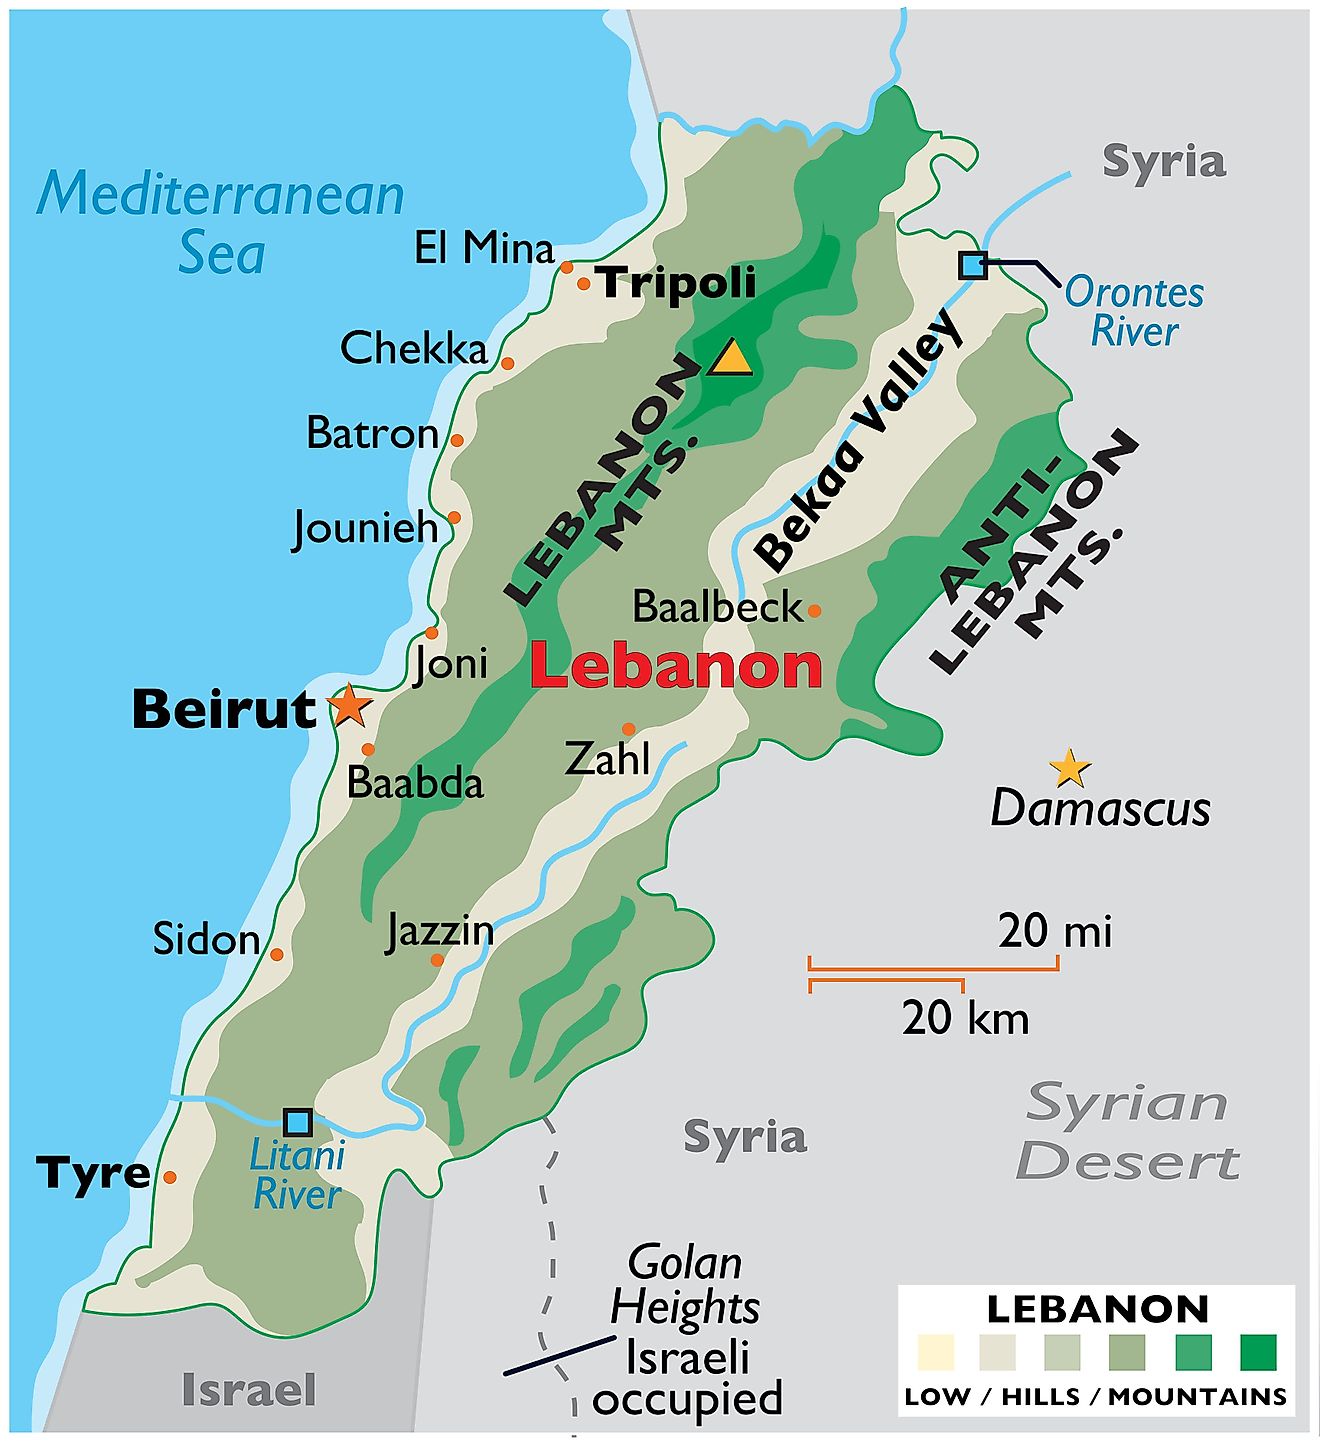 Physical Map of Lebanon showing international boundaries, relief, highest point, important cities, major mountain ranges, important rivers, etc.